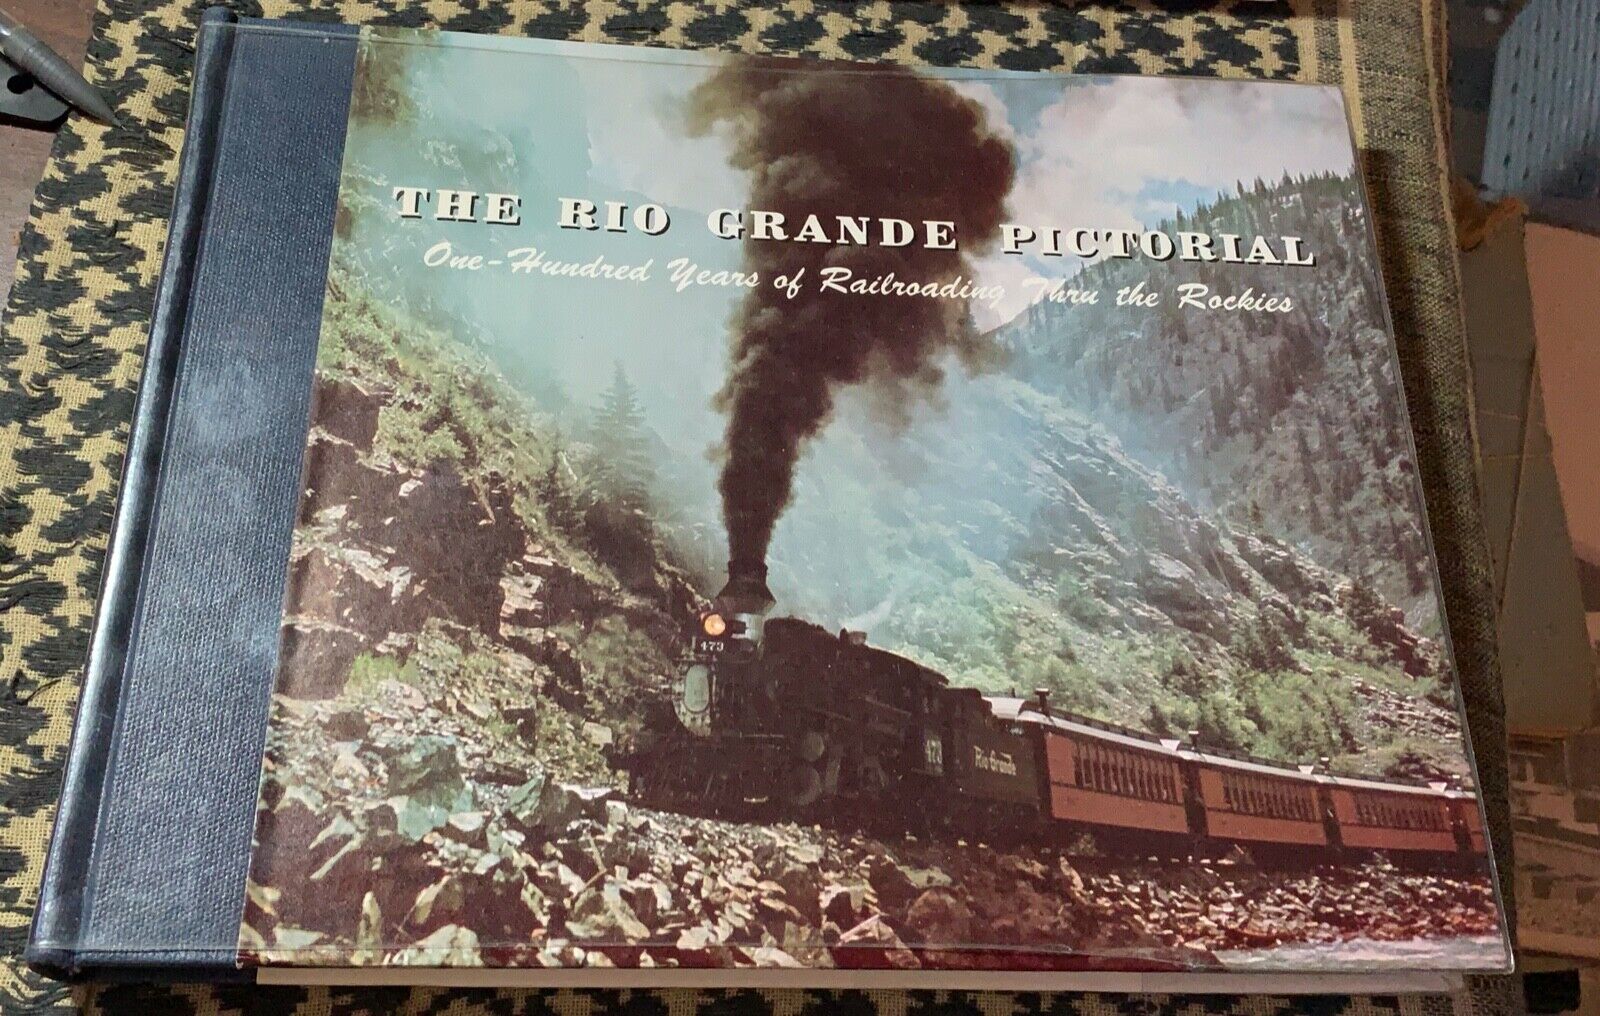 Rio Grande Pictorial. 1871-1971 One Hundred Years of Railroading Thru Rockies